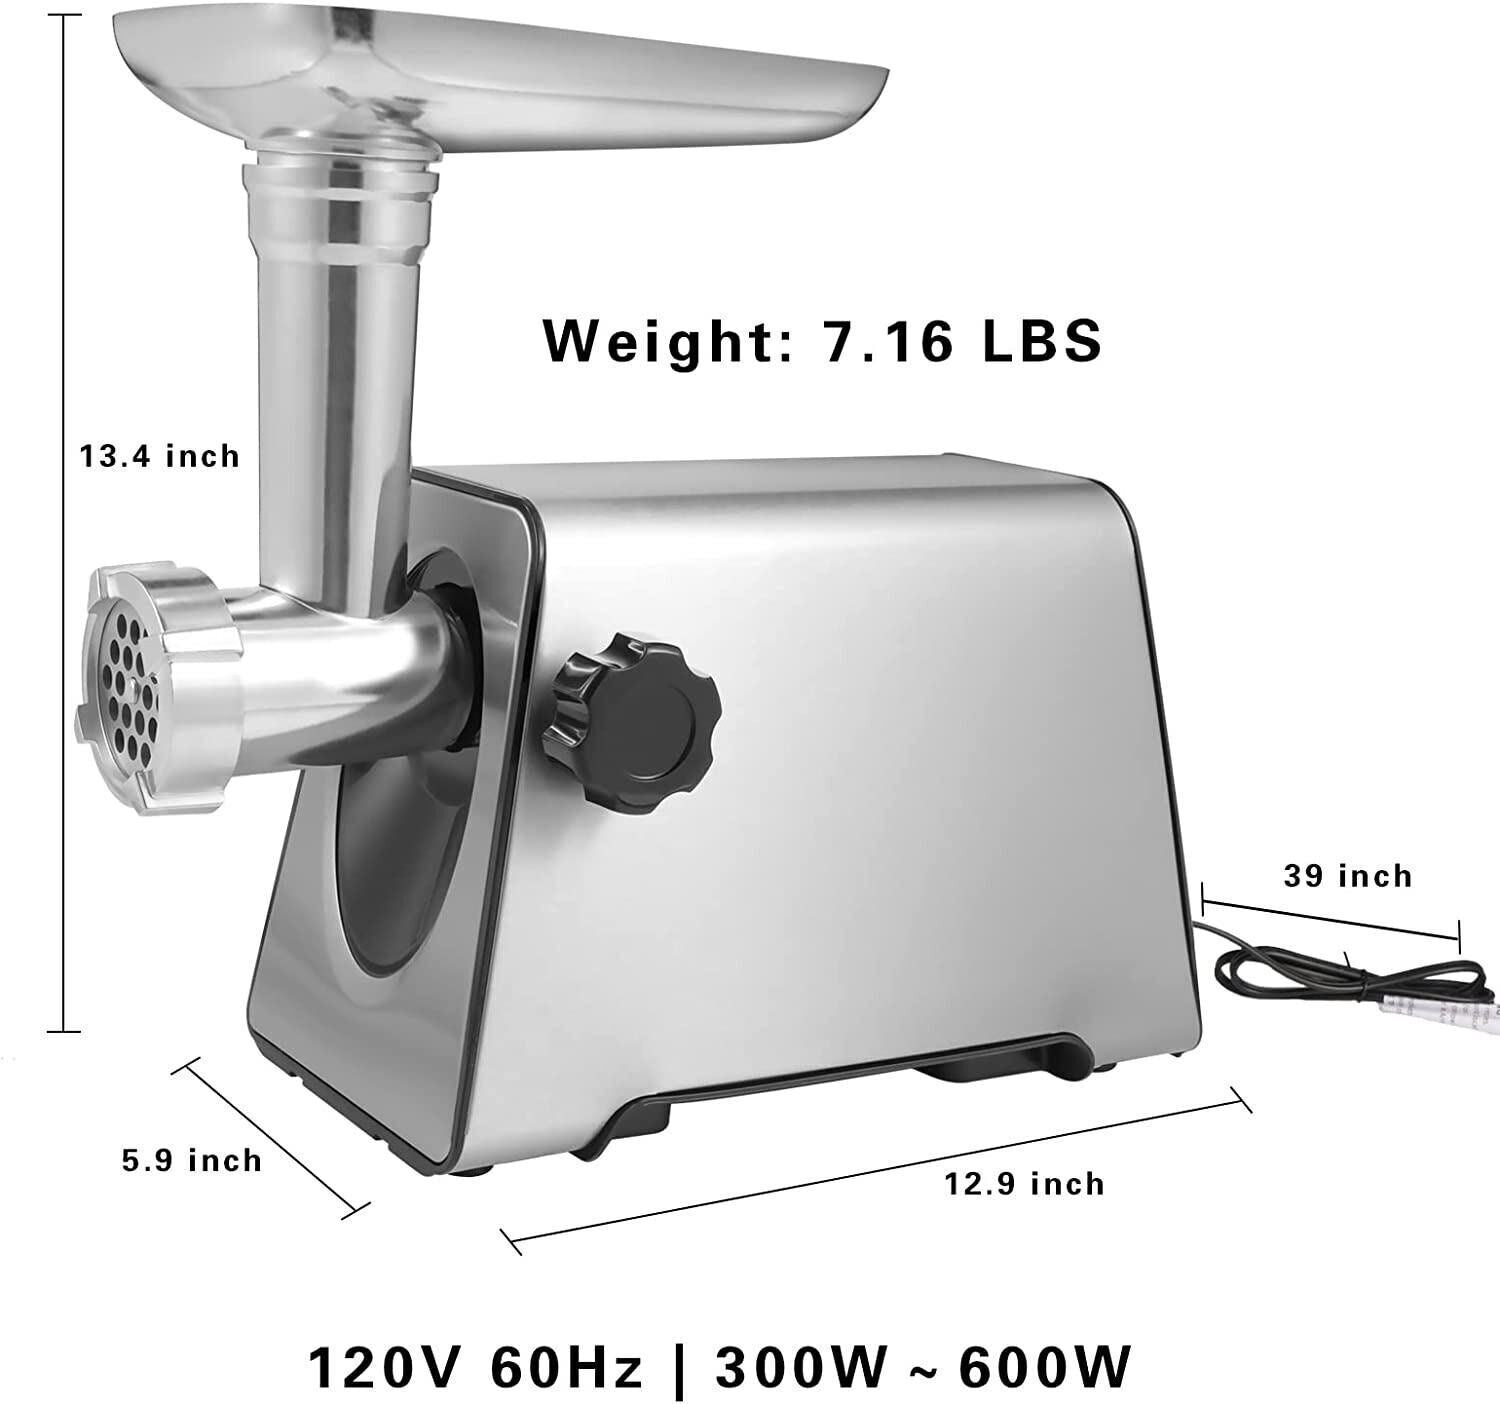 A Simple Deluxe Electric Meat Grinder with meat and other ingredients.